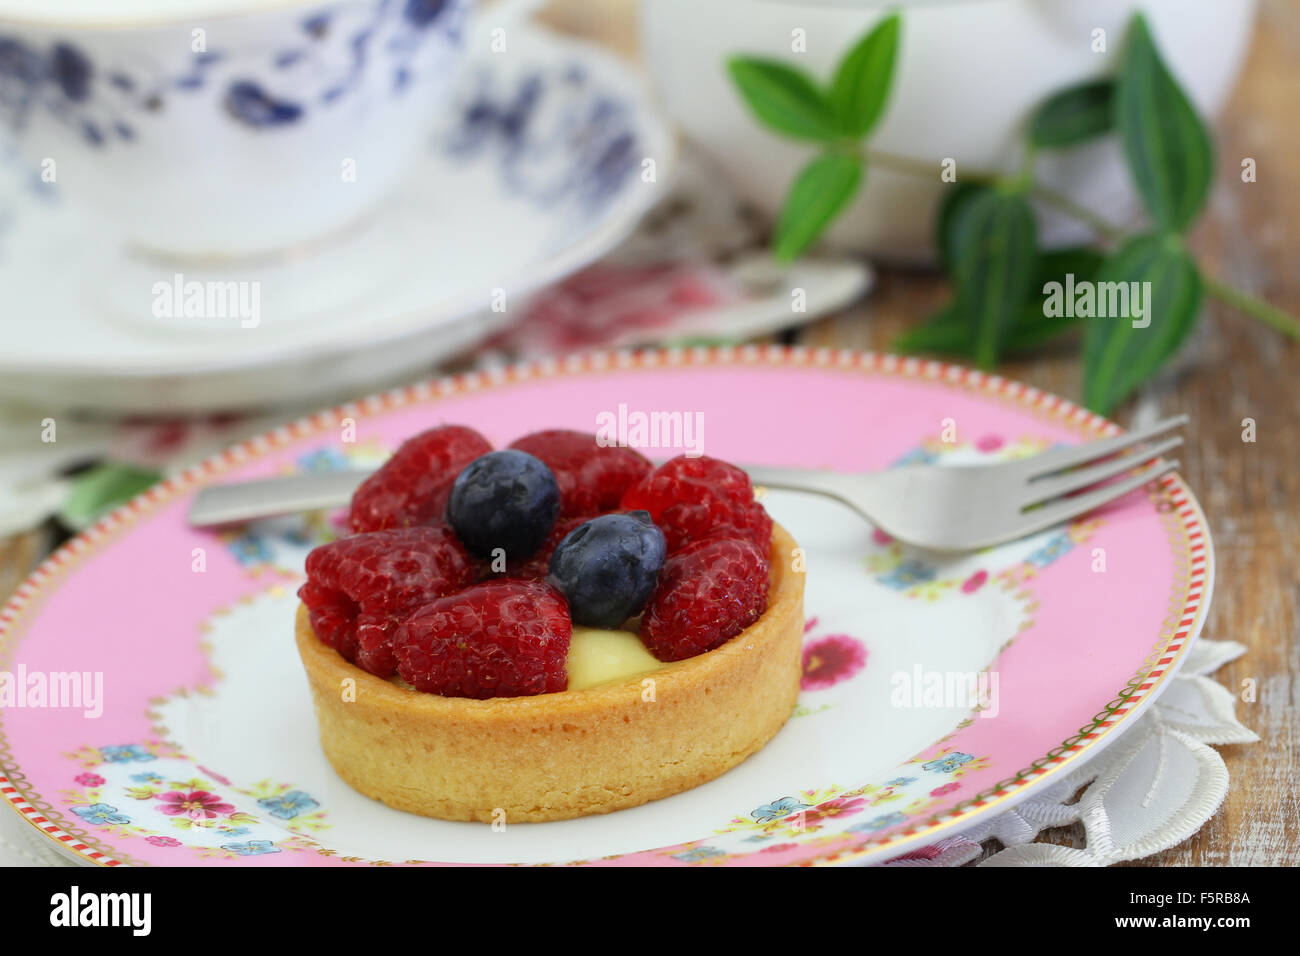 Delicious crunchy tartelette with custard, fresh raspberries and blueberries on pink plate Stock Photo